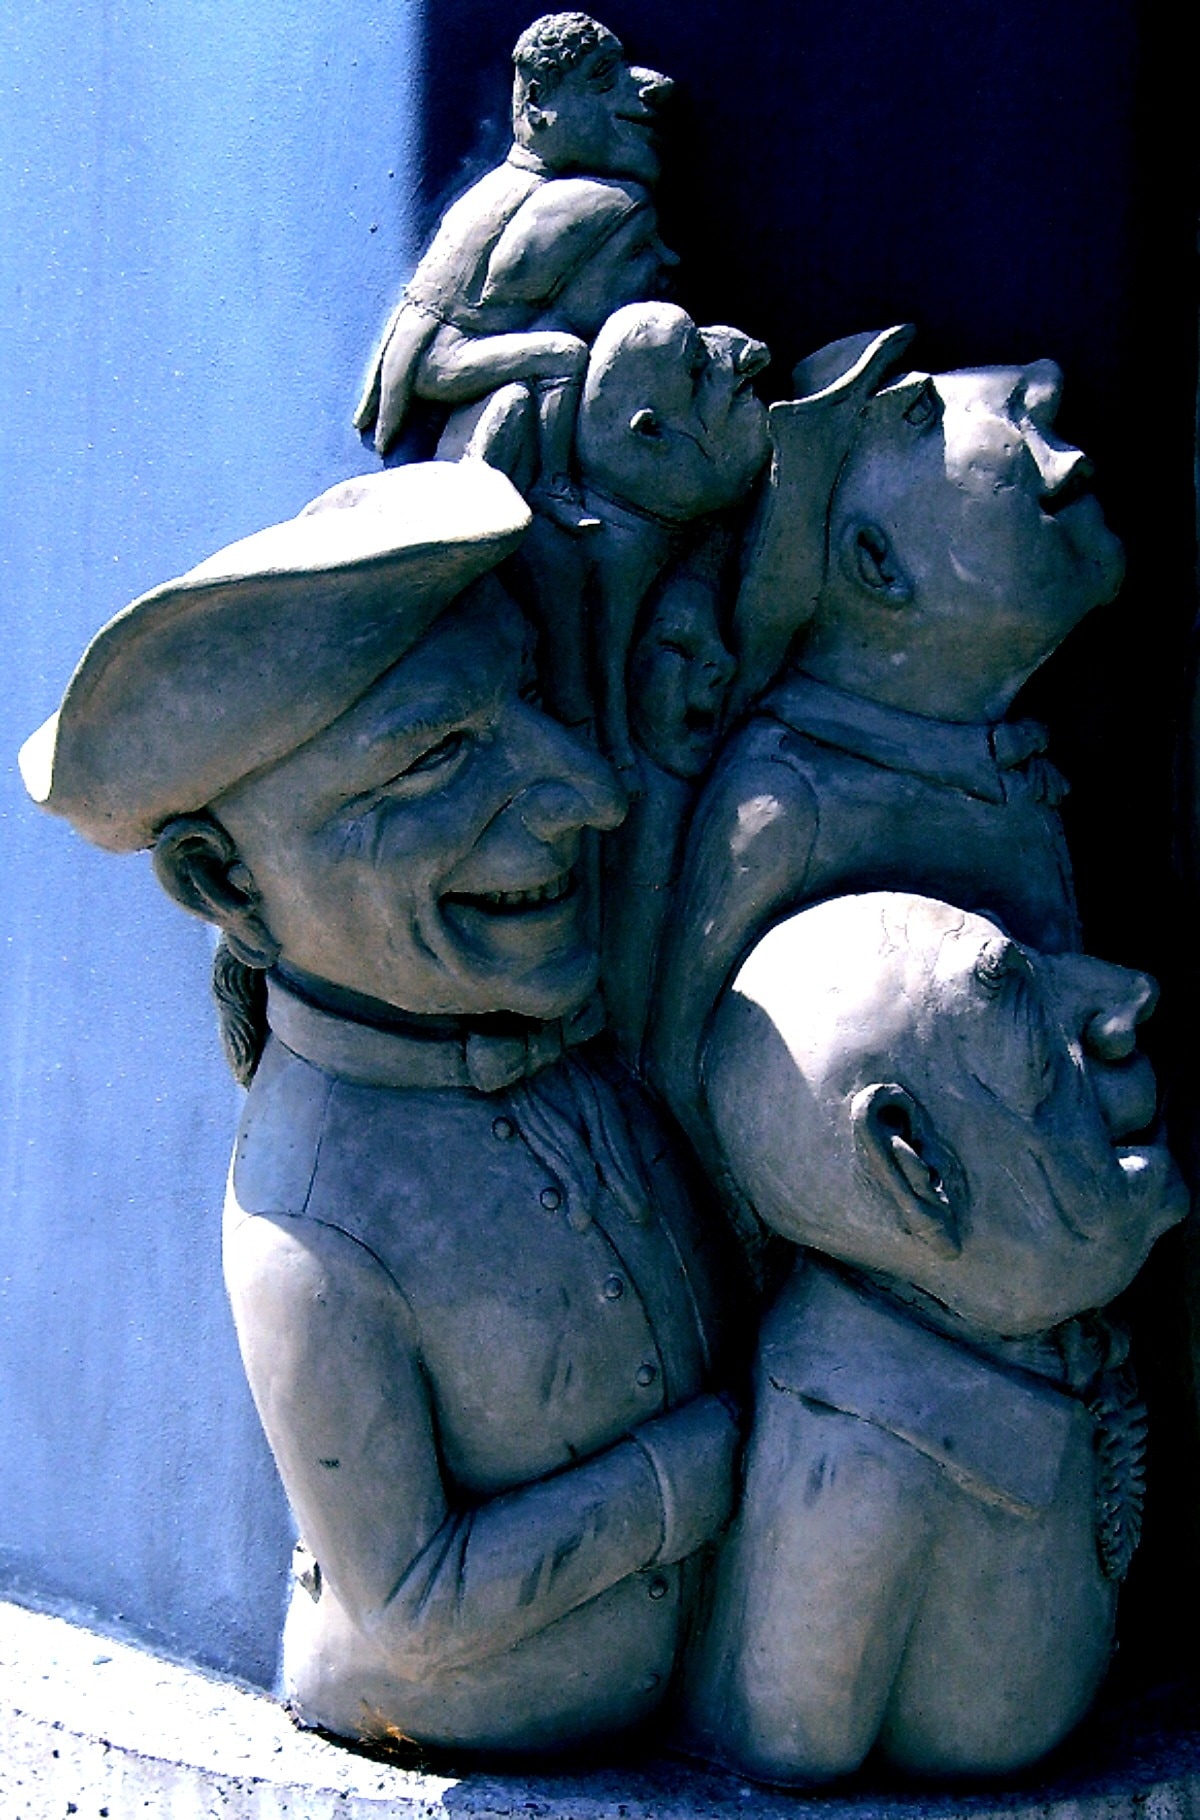 grey ceramic group of people statue